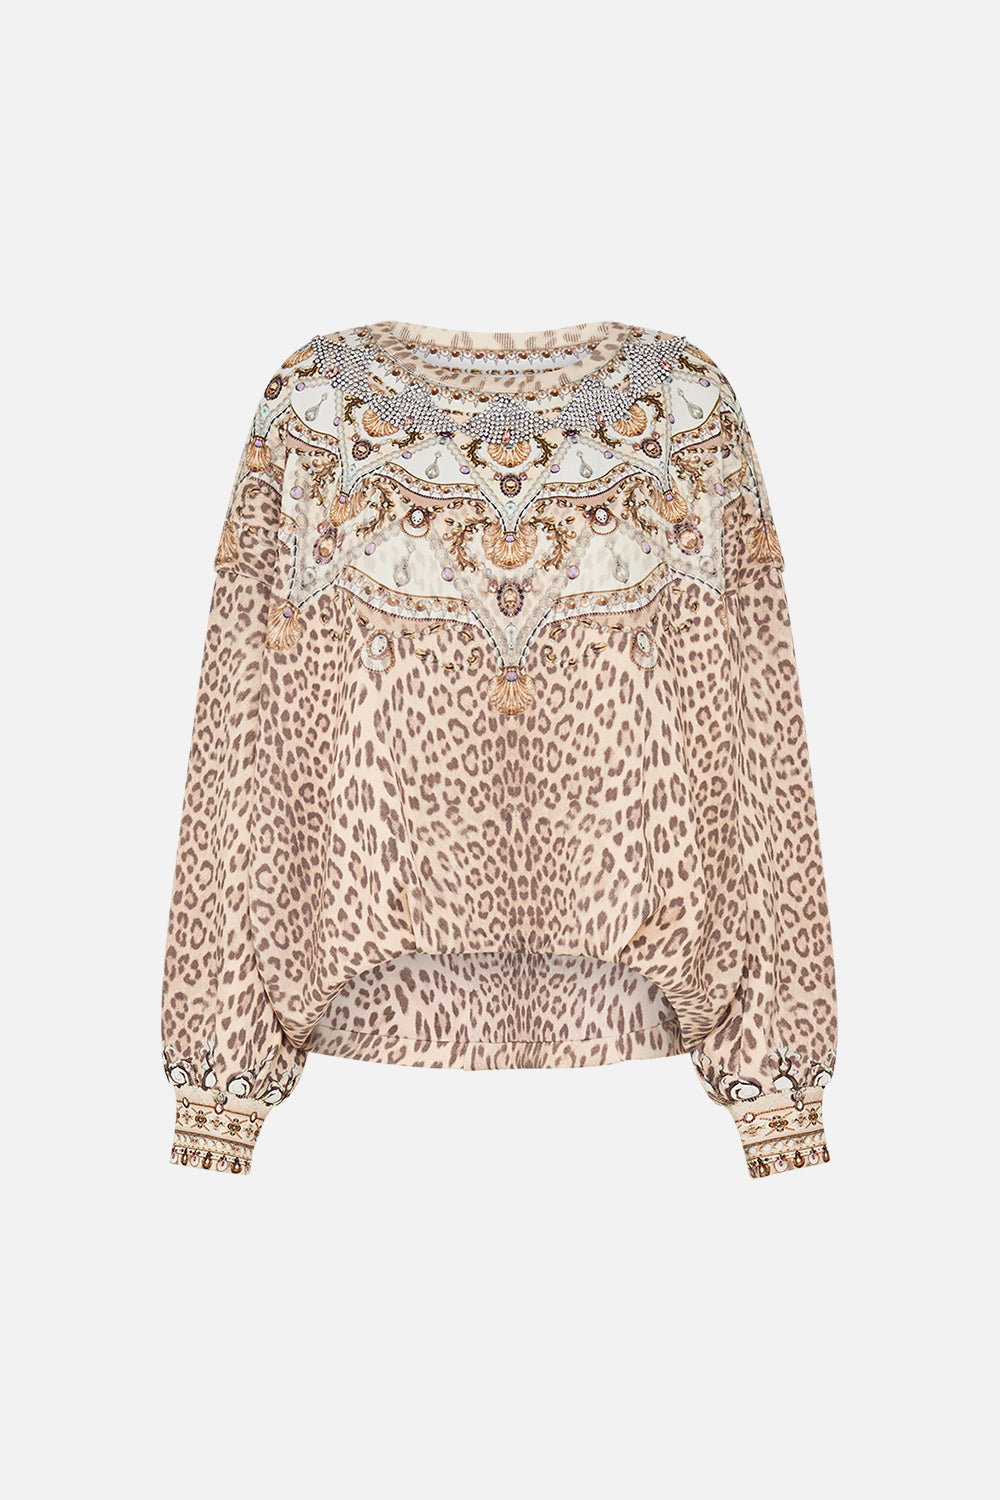 CAMILLA Blush Embellished Tuck Detail Sweater in Grotto Goddess